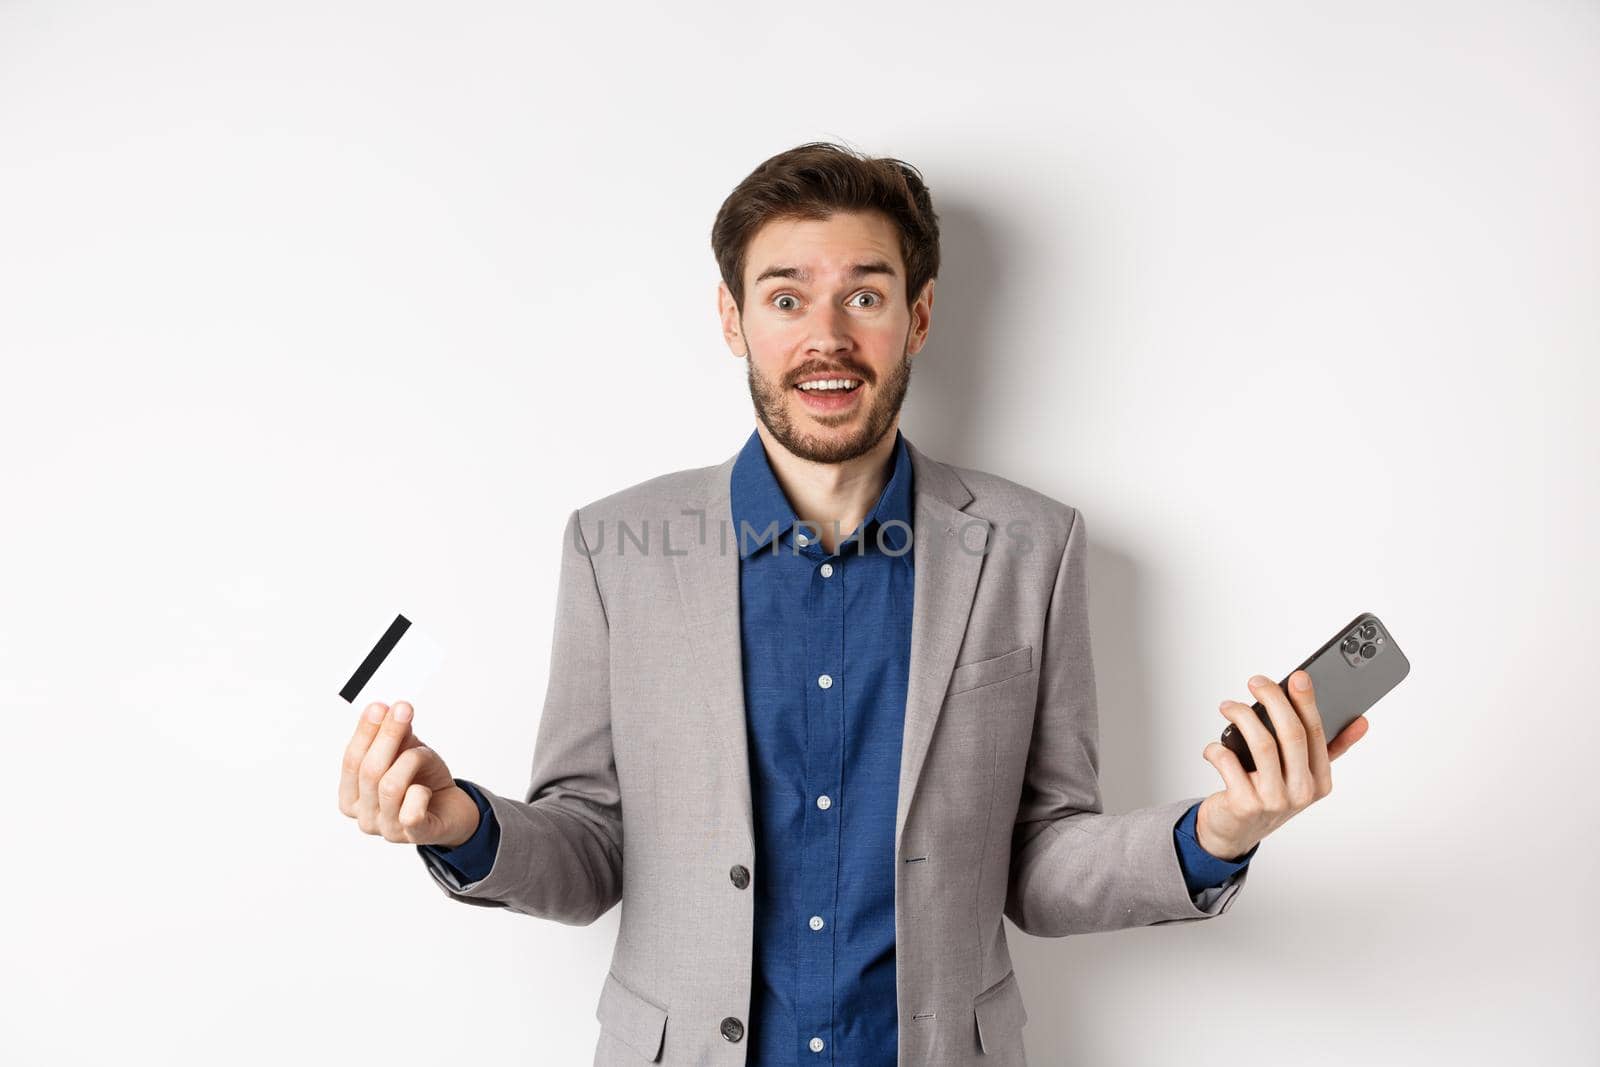 Online shopping. Surprised businessman holding plastic credit card and smartphone, making money in internet, standing in suit against white background.